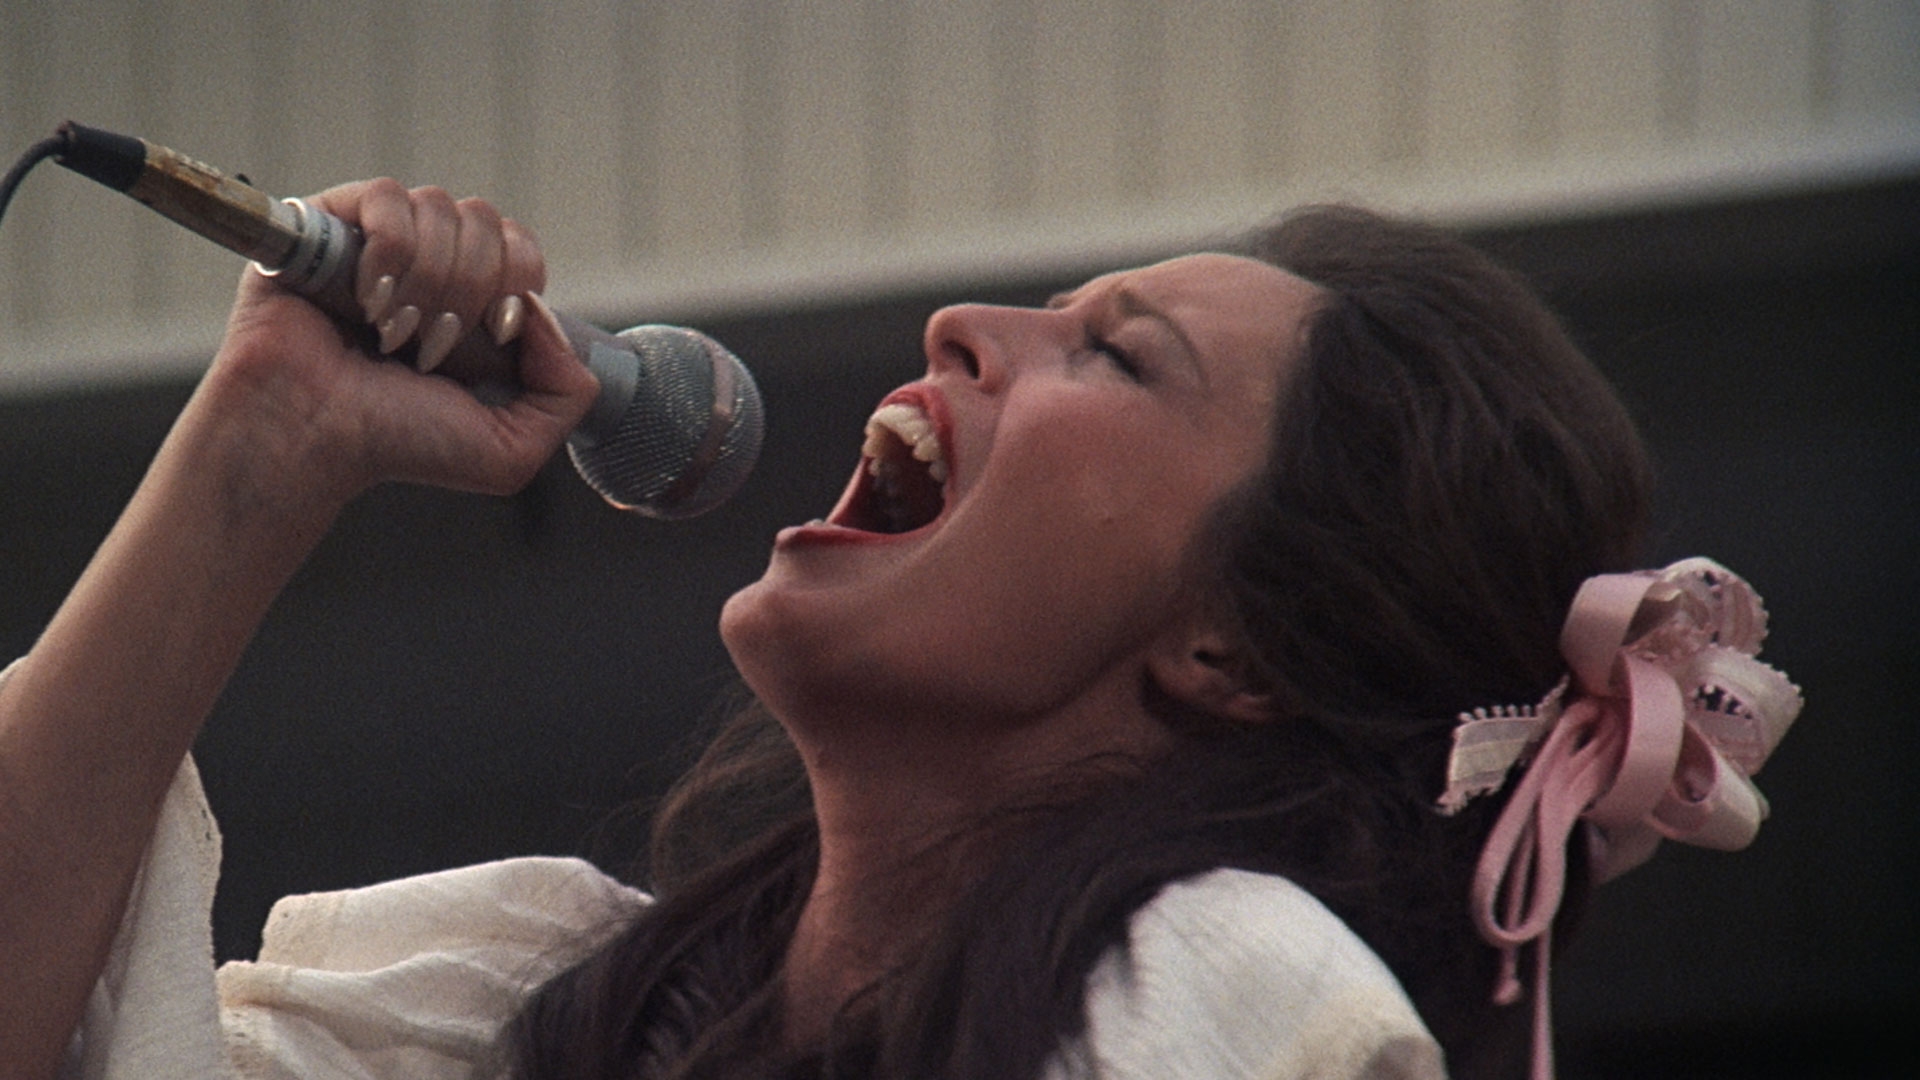 A woman singing in a production still from 'Nashville'